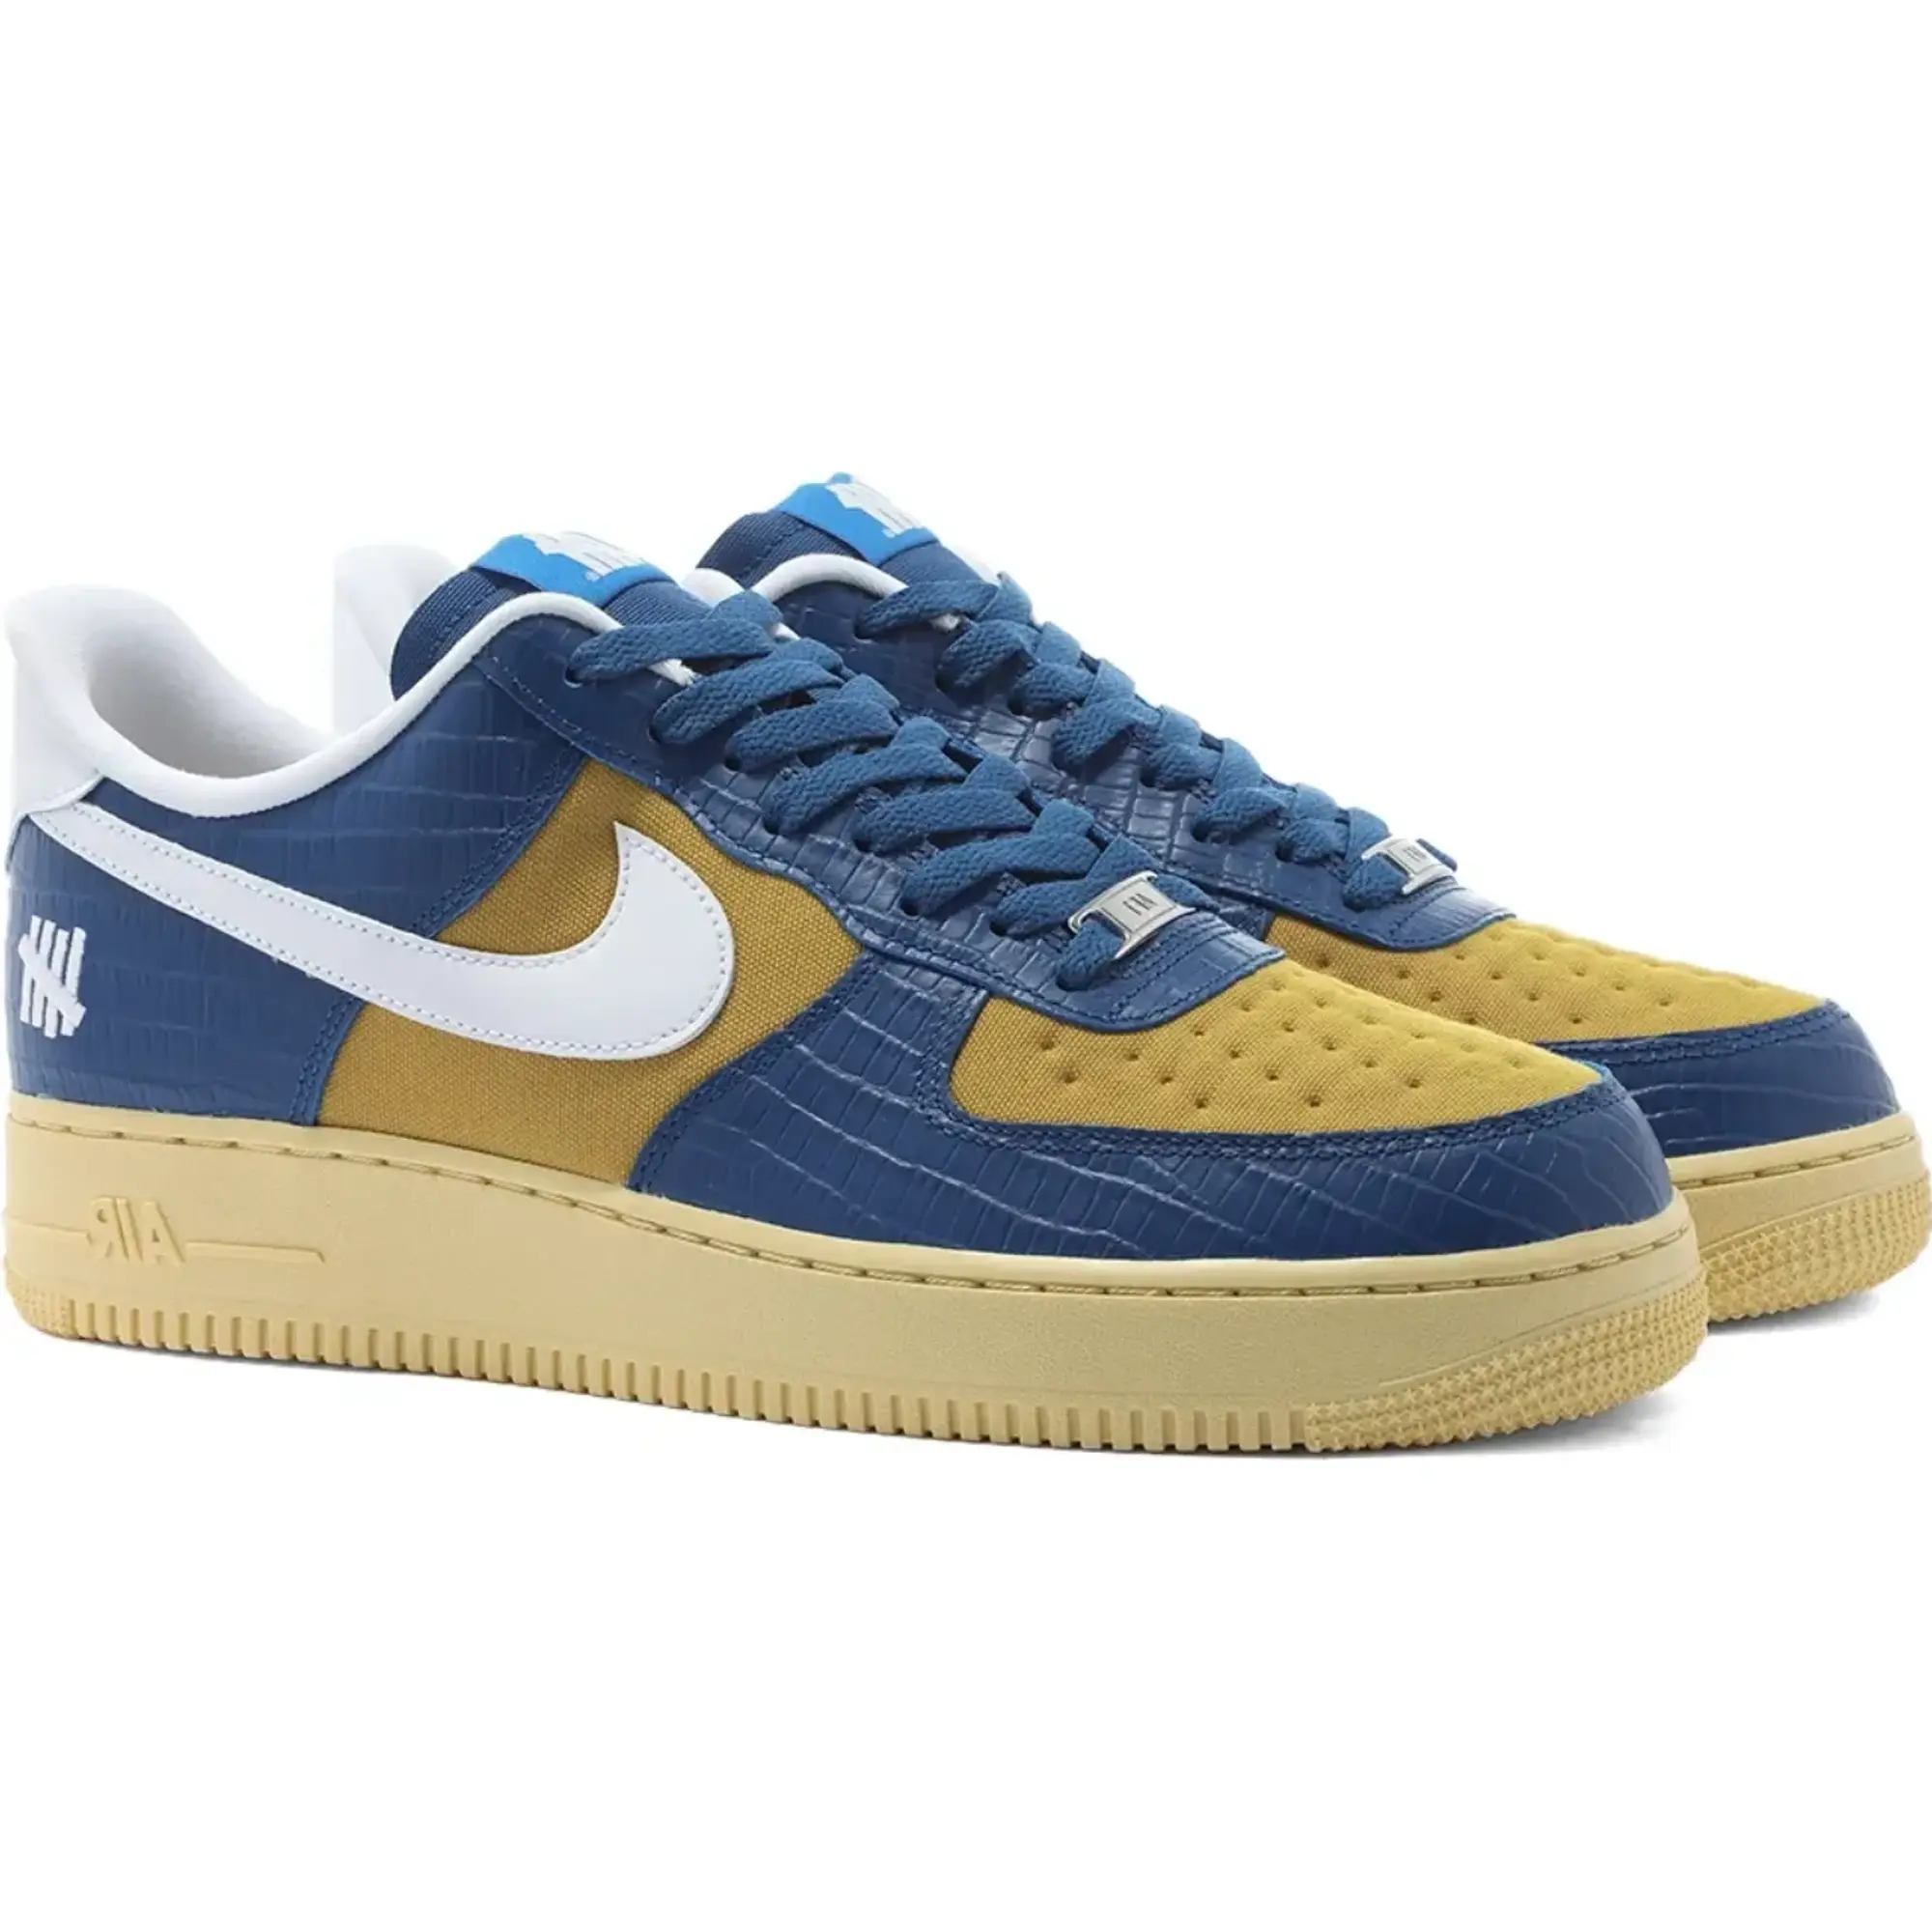 Nike x Undefeated Air Force 1 Low Dunk vs AF1 Blue Croc